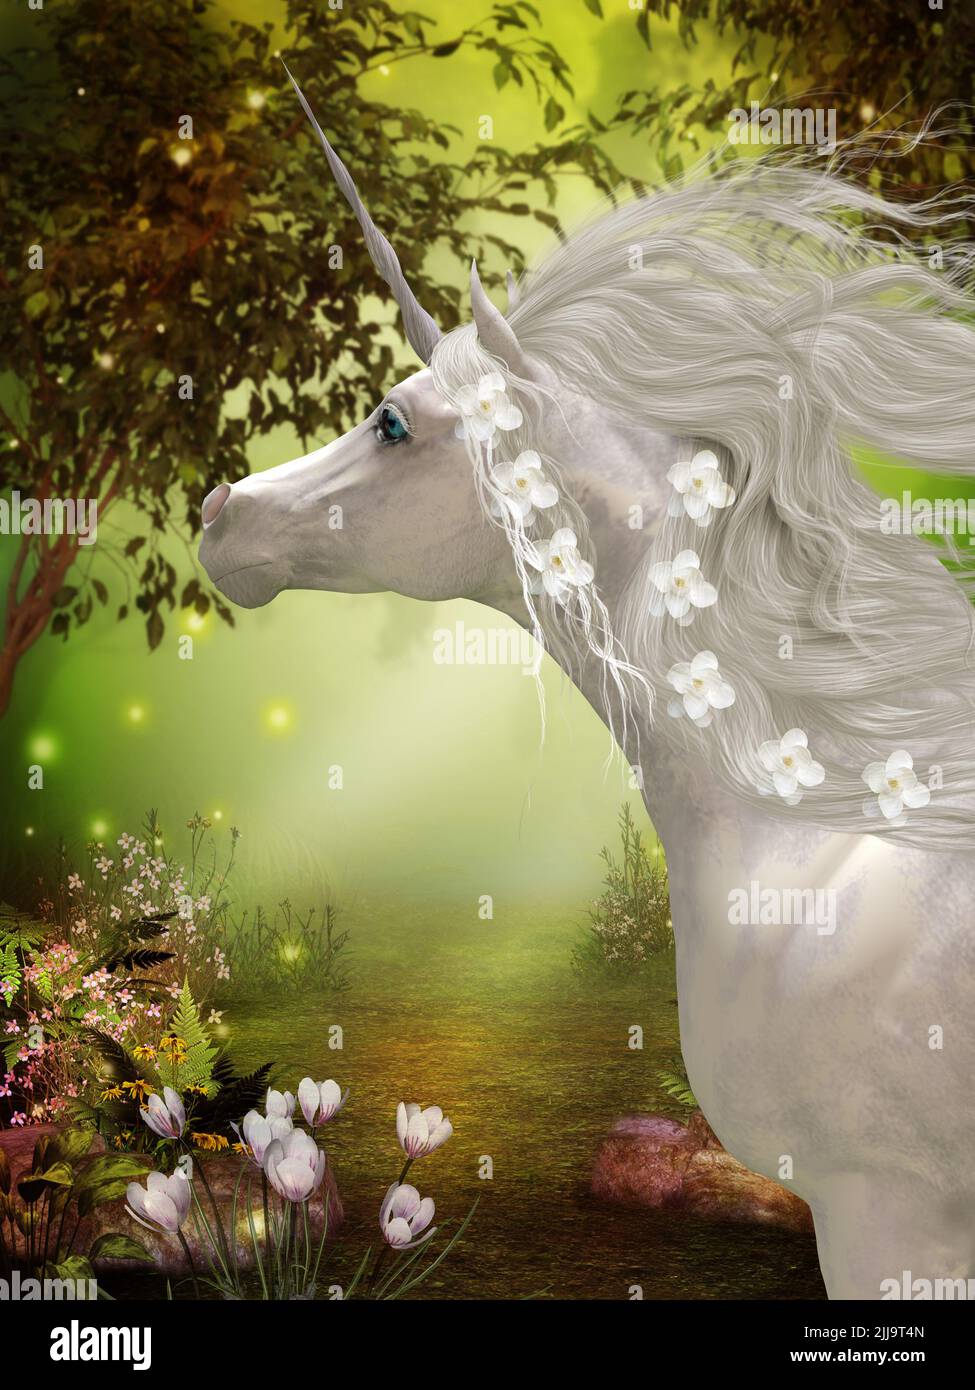 The Unicorn is a horned white horse creature of folklore and legend that lives in a magical forest. Stock Photo